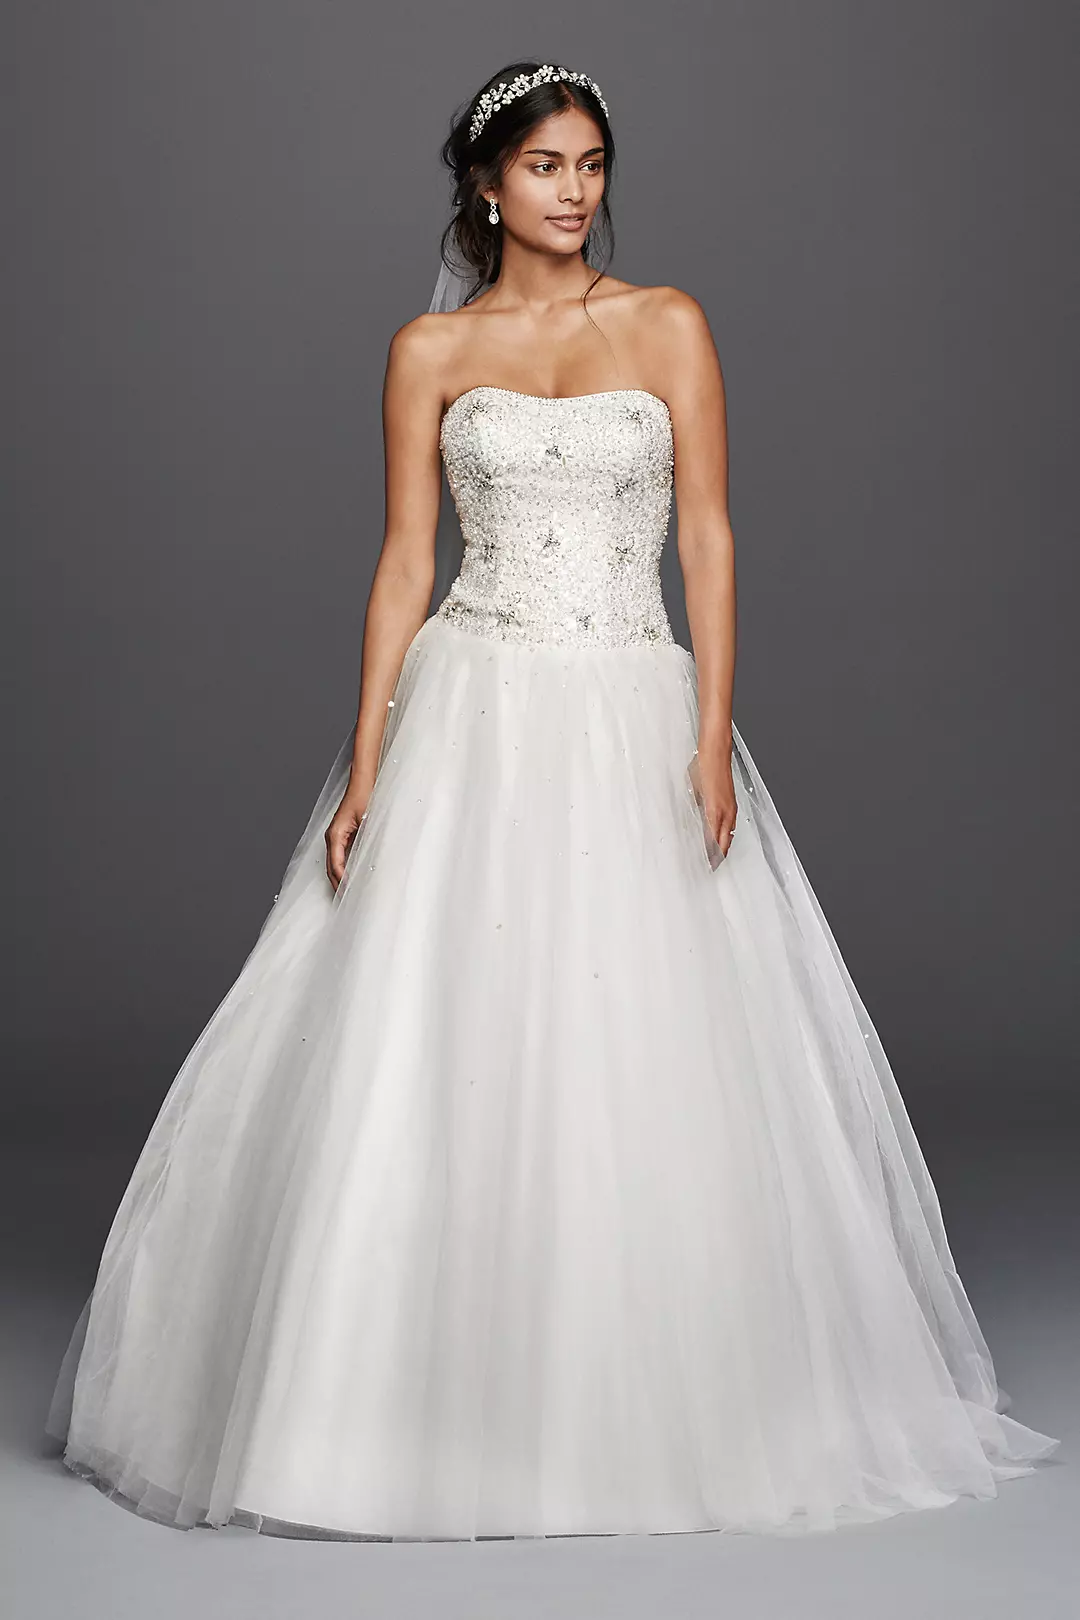 As-Is Jewel Beaded Tulle Ball Gown Wedding Dress Image